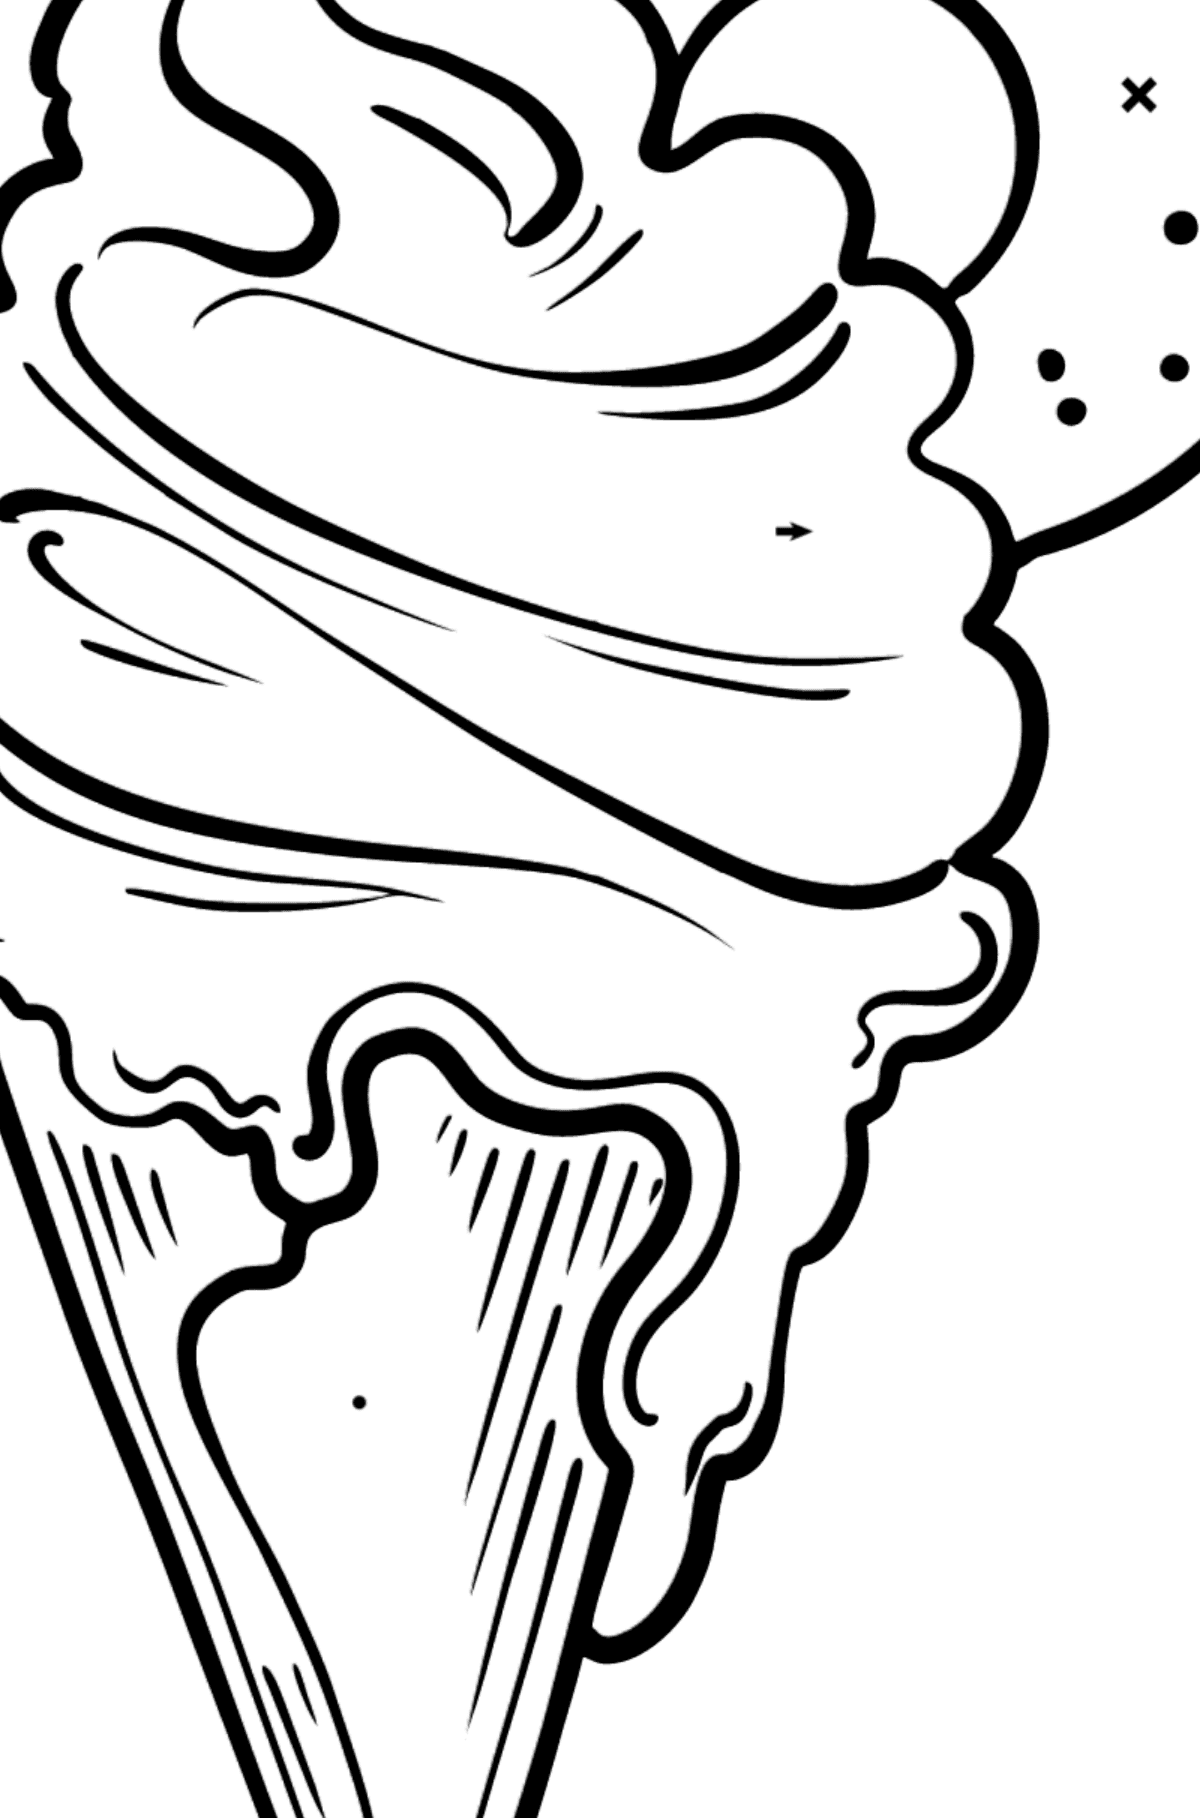 Ice Cream Cone and Pink Lollipop coloring page - Coloring by Symbols for Kids